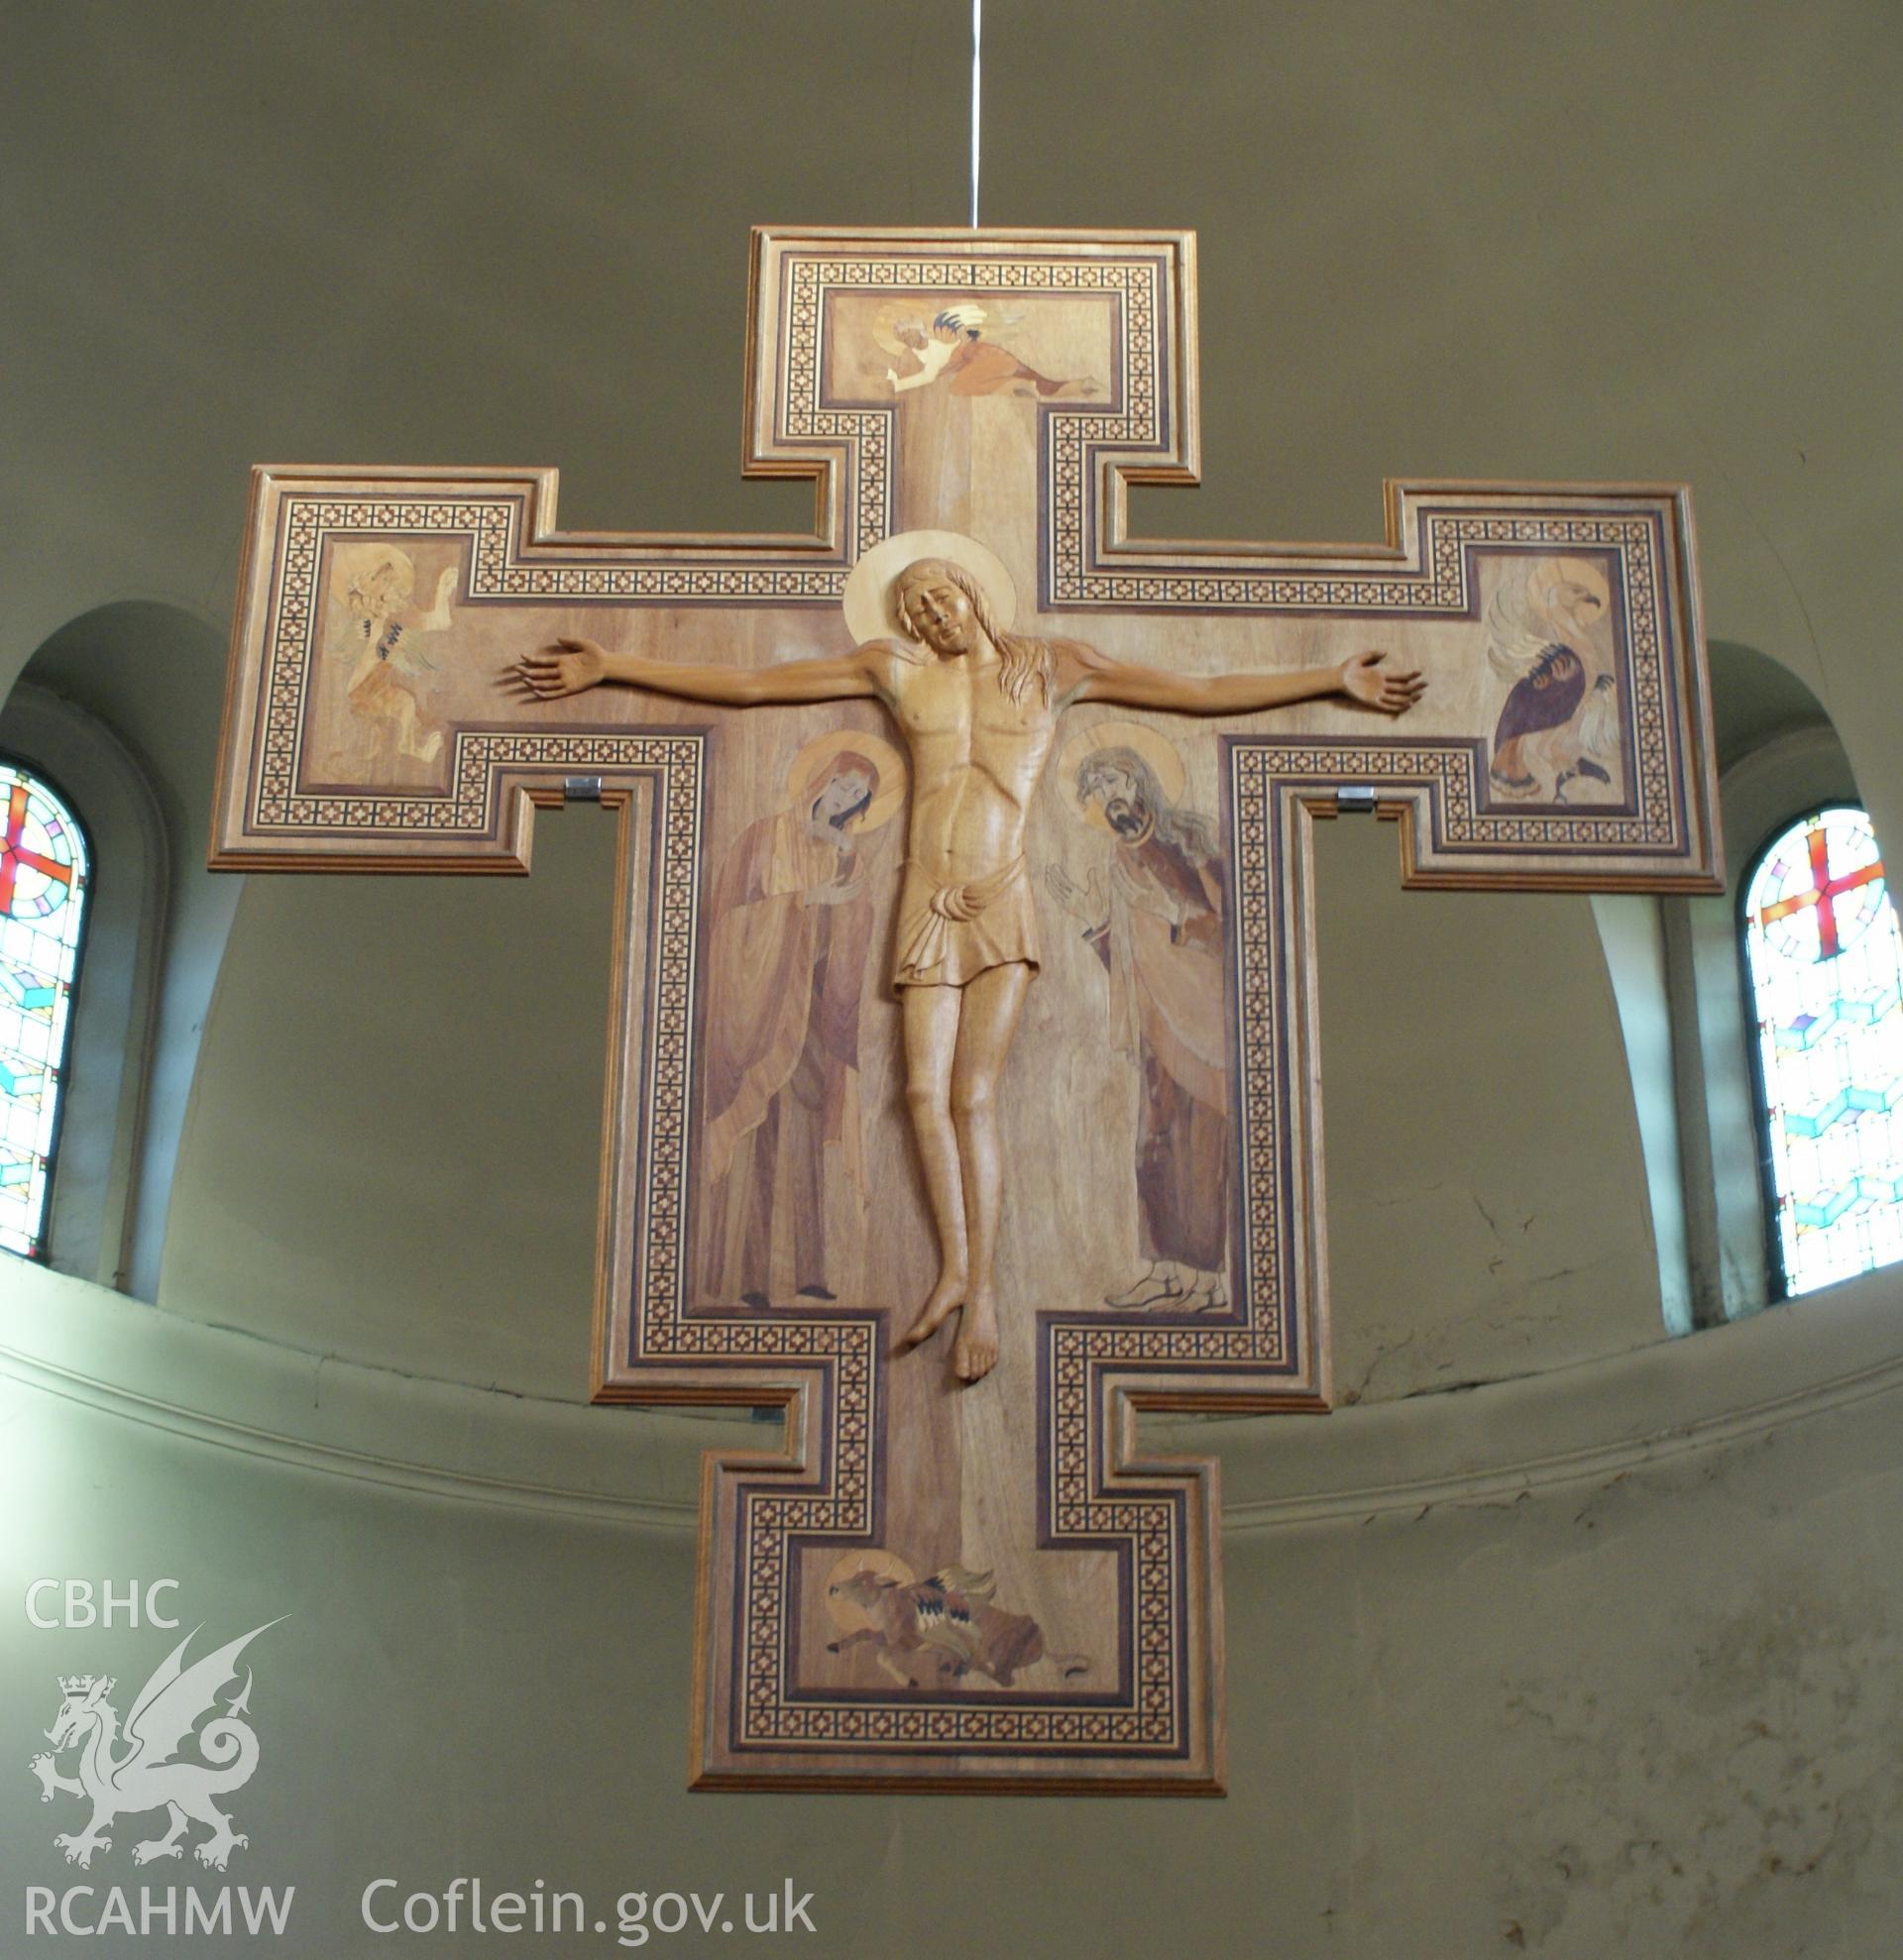 Digital colour photograph showing the life-size sanctuary crucifix by Penanne Crabbe (1999), at St Dyfrig's Catholic church, Treforest.